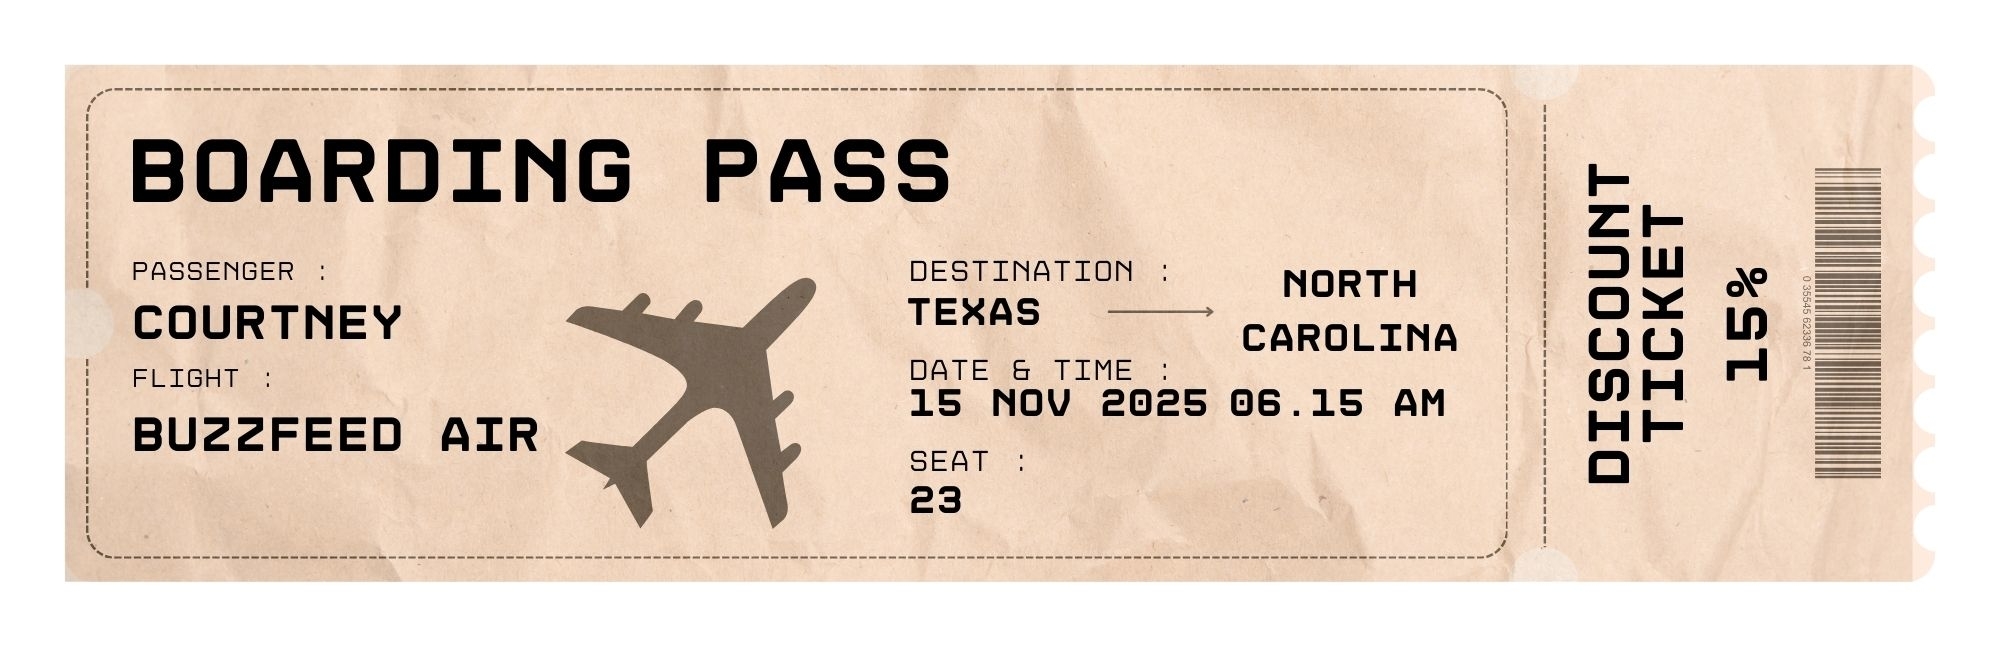 Boarding pass for a flight from Texas to North Carolina on BuzzFeed Air with a discount